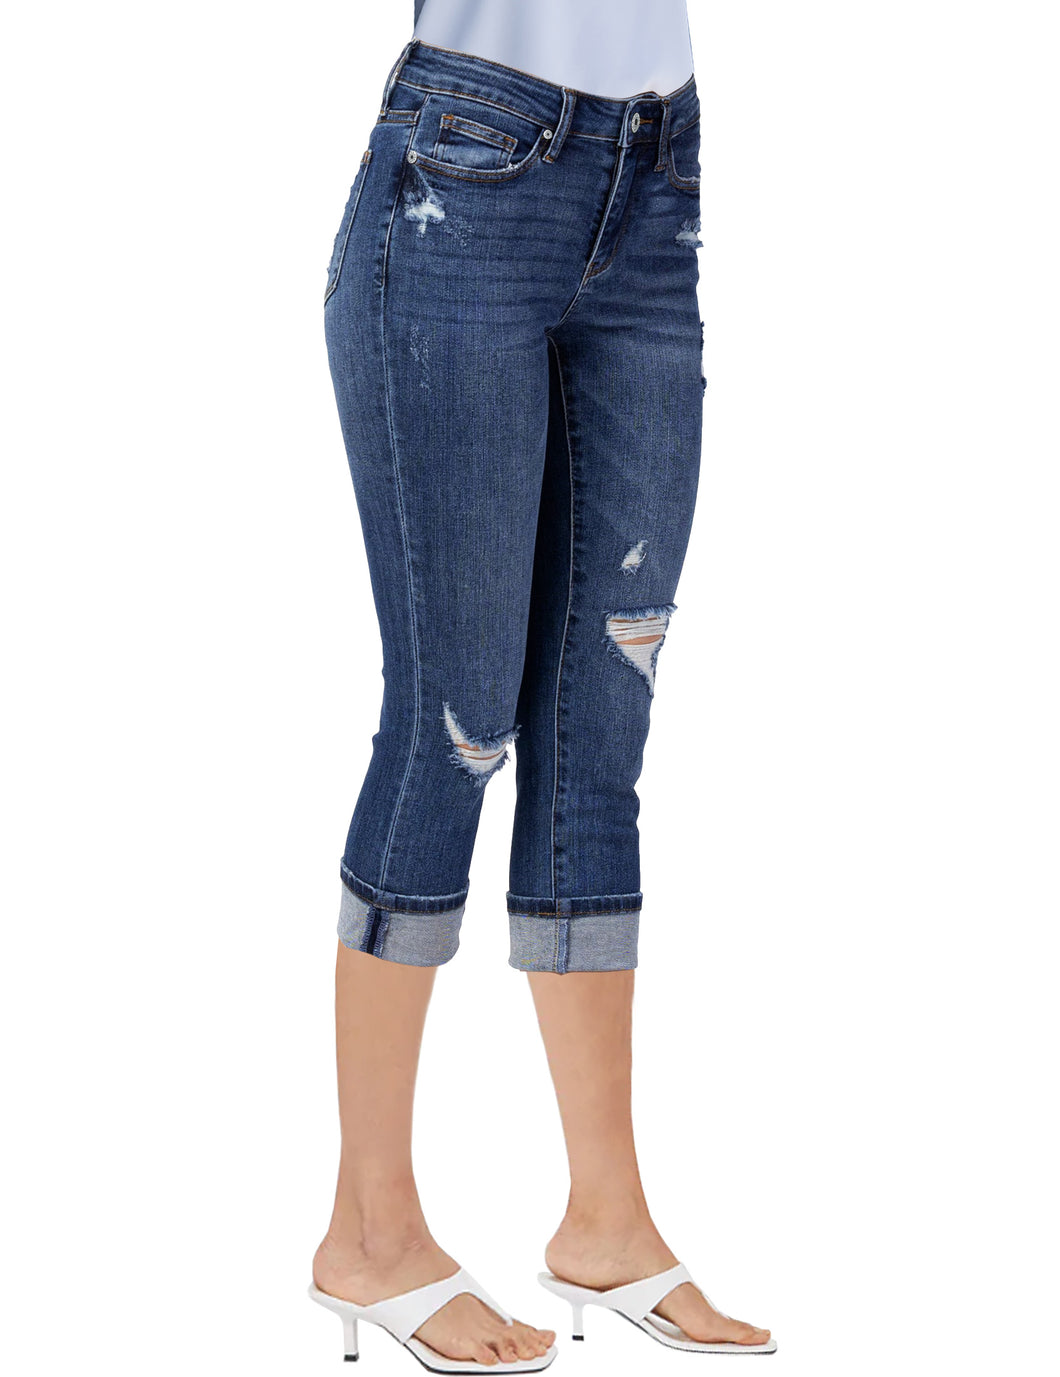 luvamia Capri Jeans for Women Stretch High Waisted Distressed